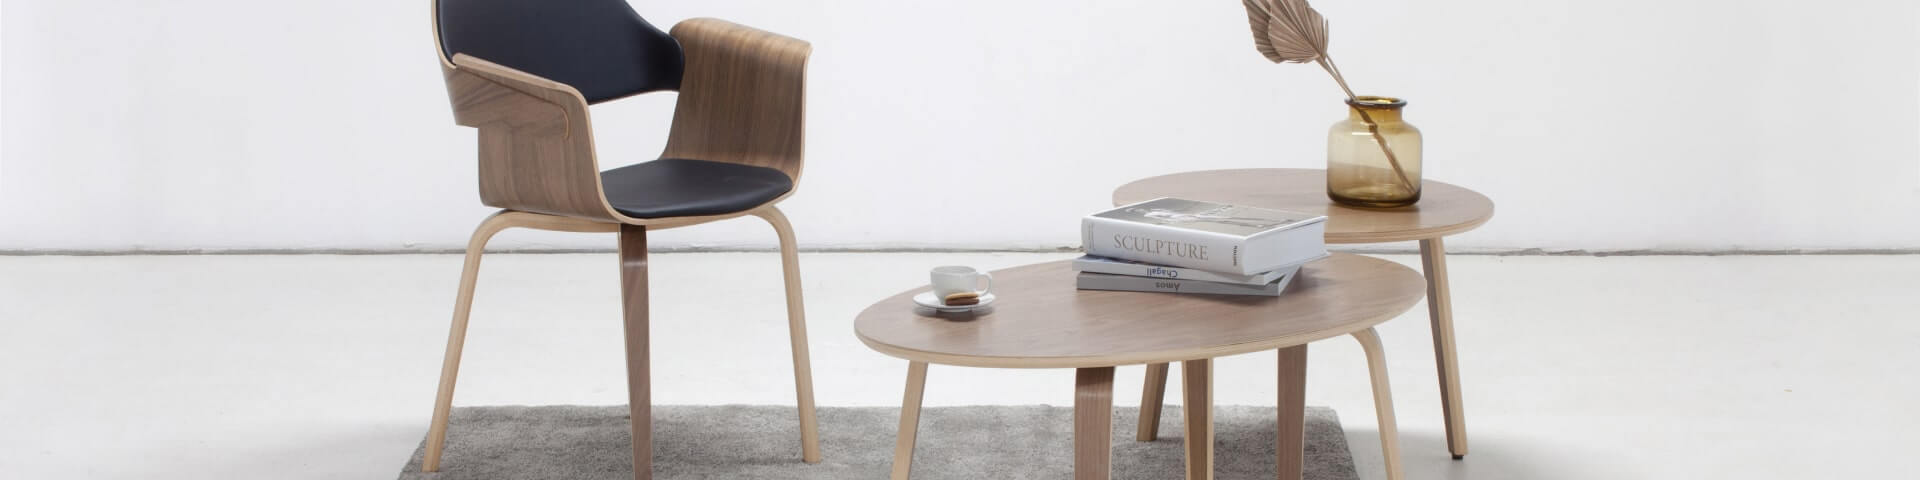 Plydesign's SUBMARINE Nesting Coffee Table: Sleek, minimalistic design with warm wood accents for cozy relaxation.